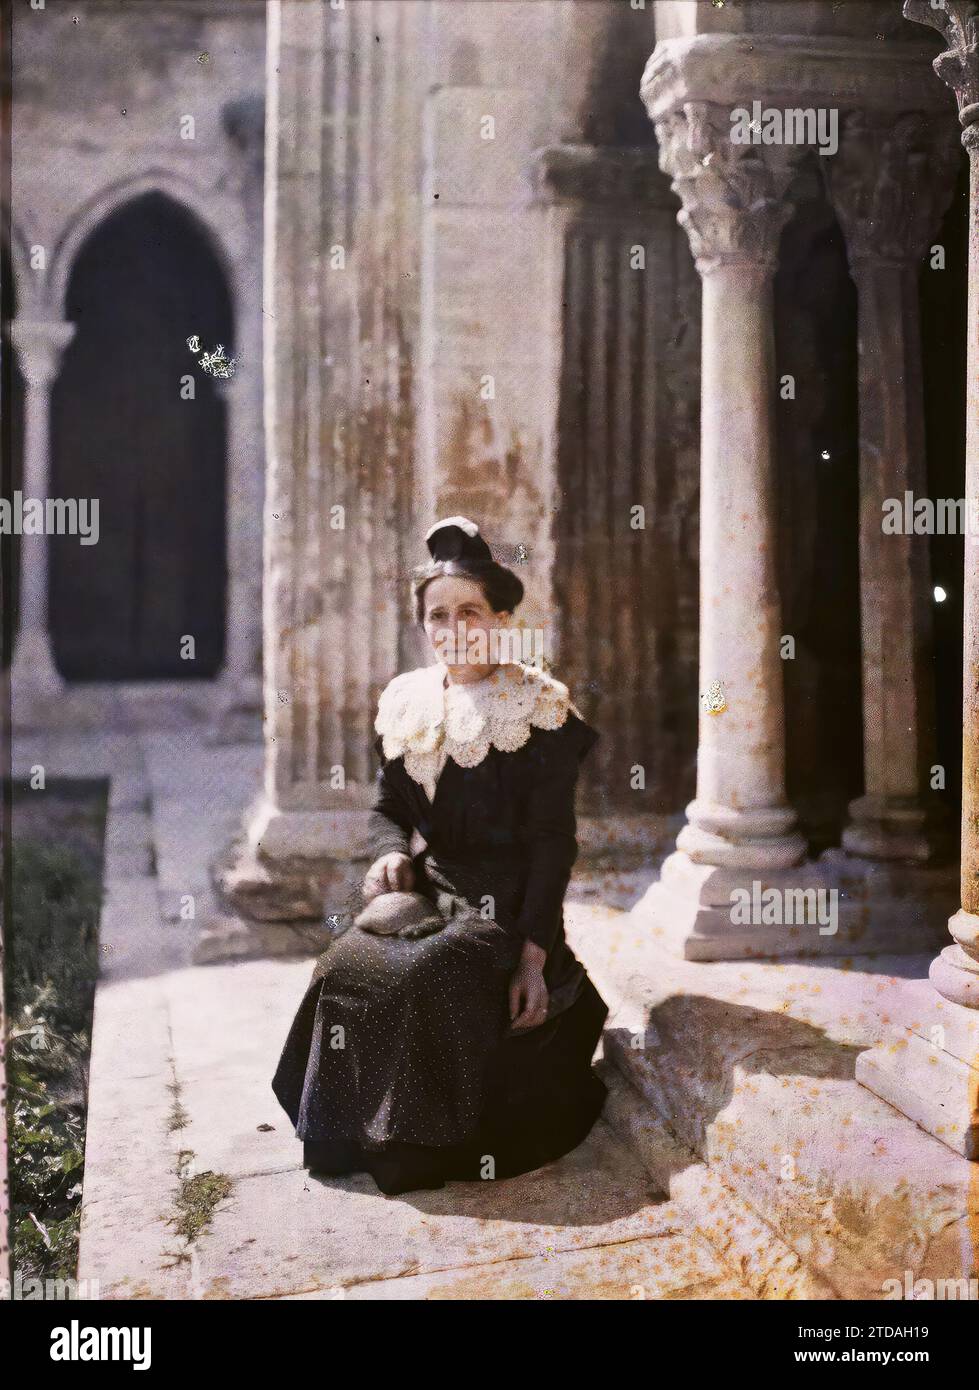 Arles, France Portrait of Mademoiselle Marie Busset, Human Beings, Animal, Clothing, Woman, Real Animal, Costume, Cloister, Portrait, Hairstyle, Headgear, France, Arles, Arlésiennes - Melle Marie Busset, the Arlesian with the Turtle, Arles, 17/04/1916 - 17/04/1916, Léon, Auguste, photographer, 1916 - Provinces Françaises - Jean Brunhes, Auguste Léon et Georges Chevalier - (April-July), Autochrome, photo, Glass, Autochrome, photo, Positive, Vertical, Size 9 x 12 cm Stock Photo